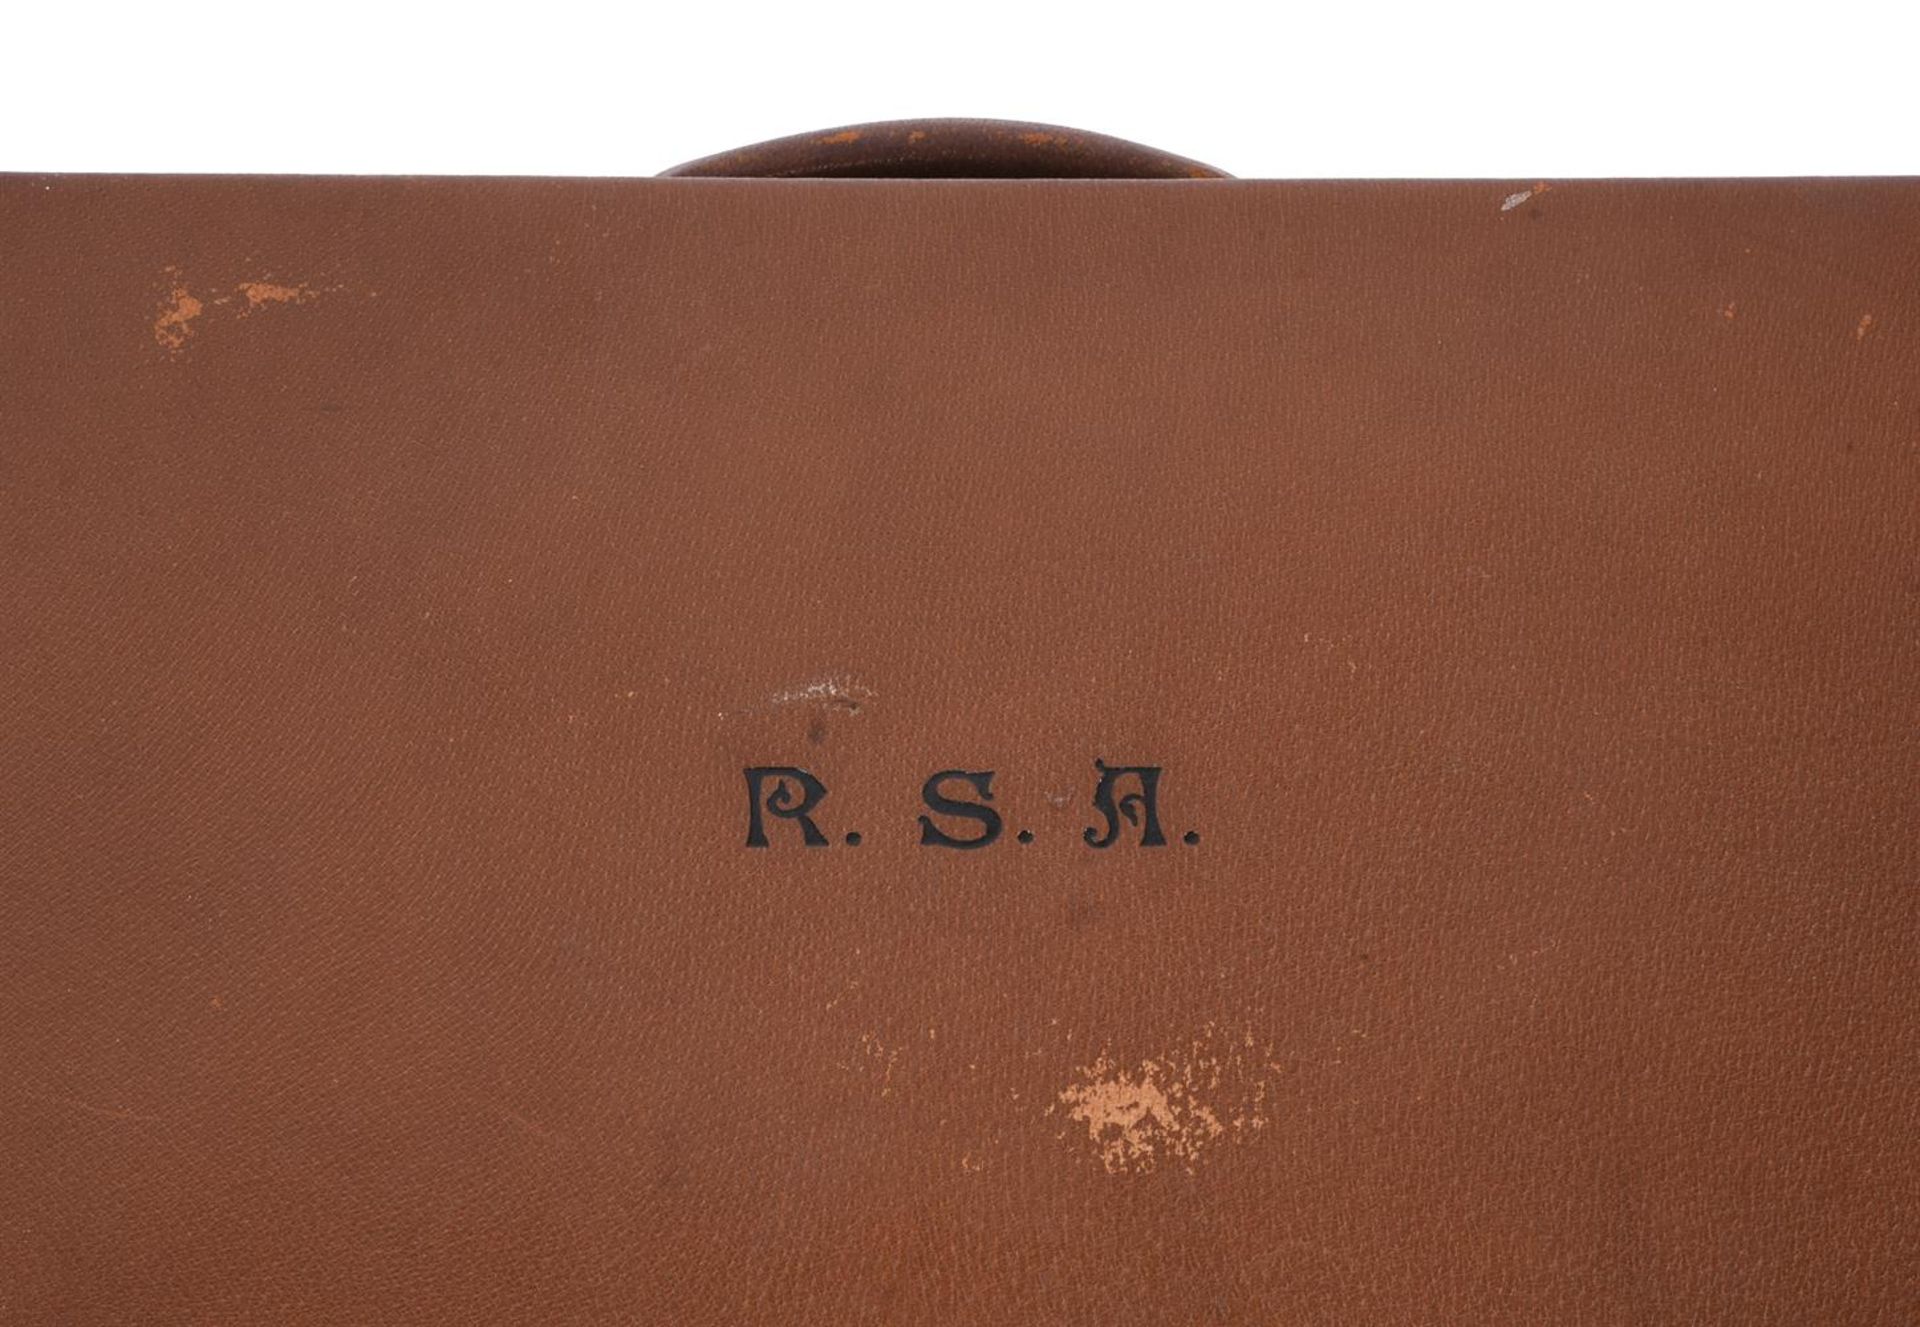 Y A LEATHER TRAVEL CASE - Image 2 of 2